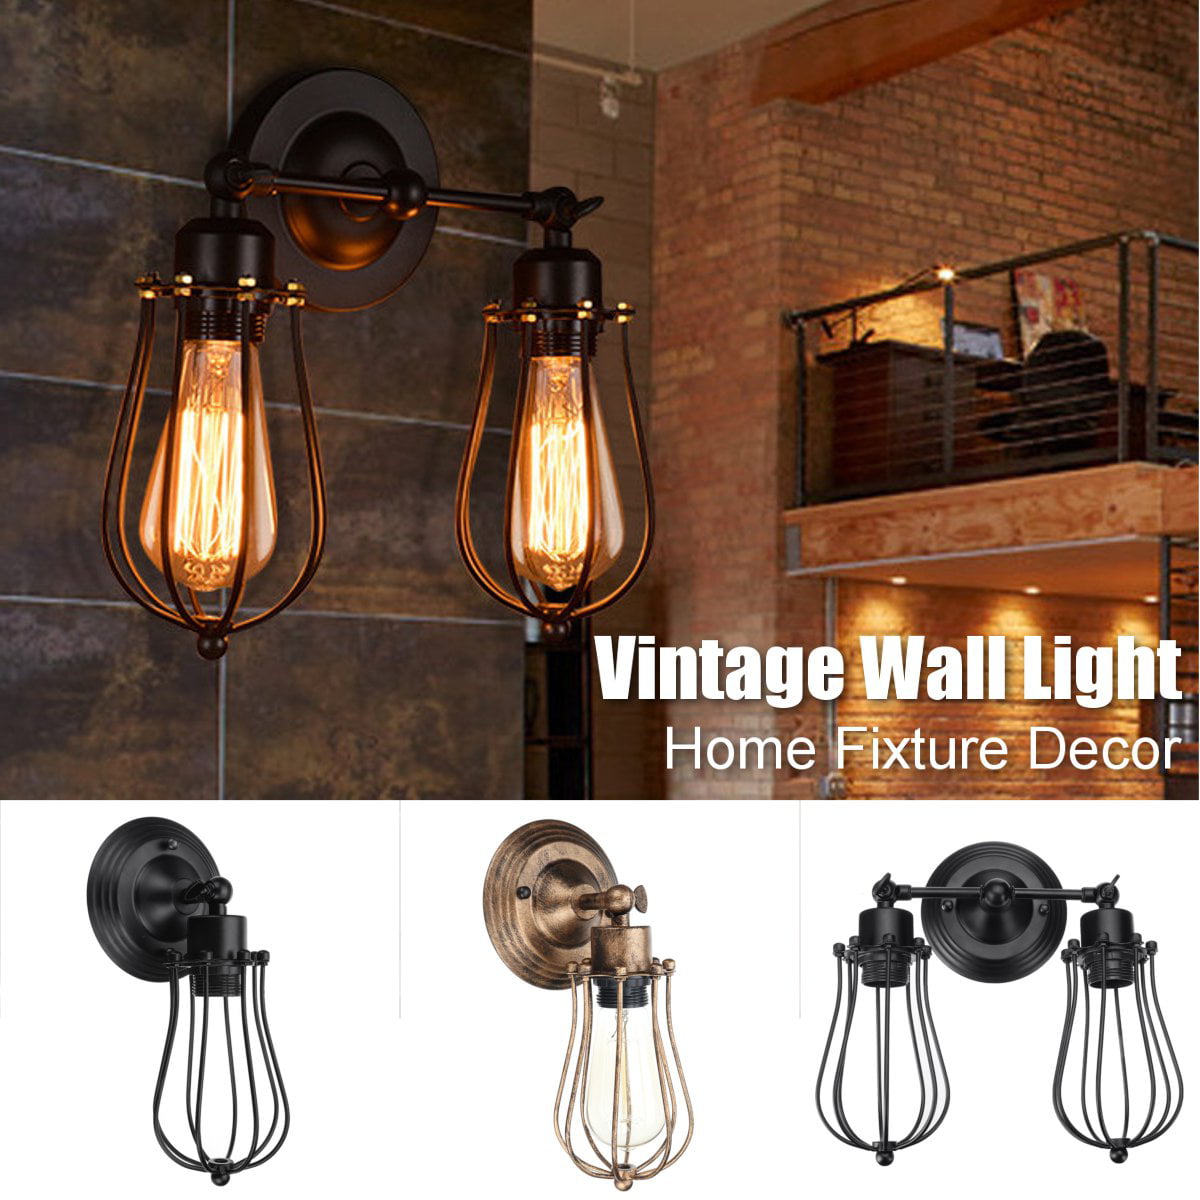 2 Packs Wall Lamp Vintage Industrial Adjustable Metal E27 Base Wall Sconce Antique Wire Cage Rustic Retro Style for Bedroom Living Room Dining Table